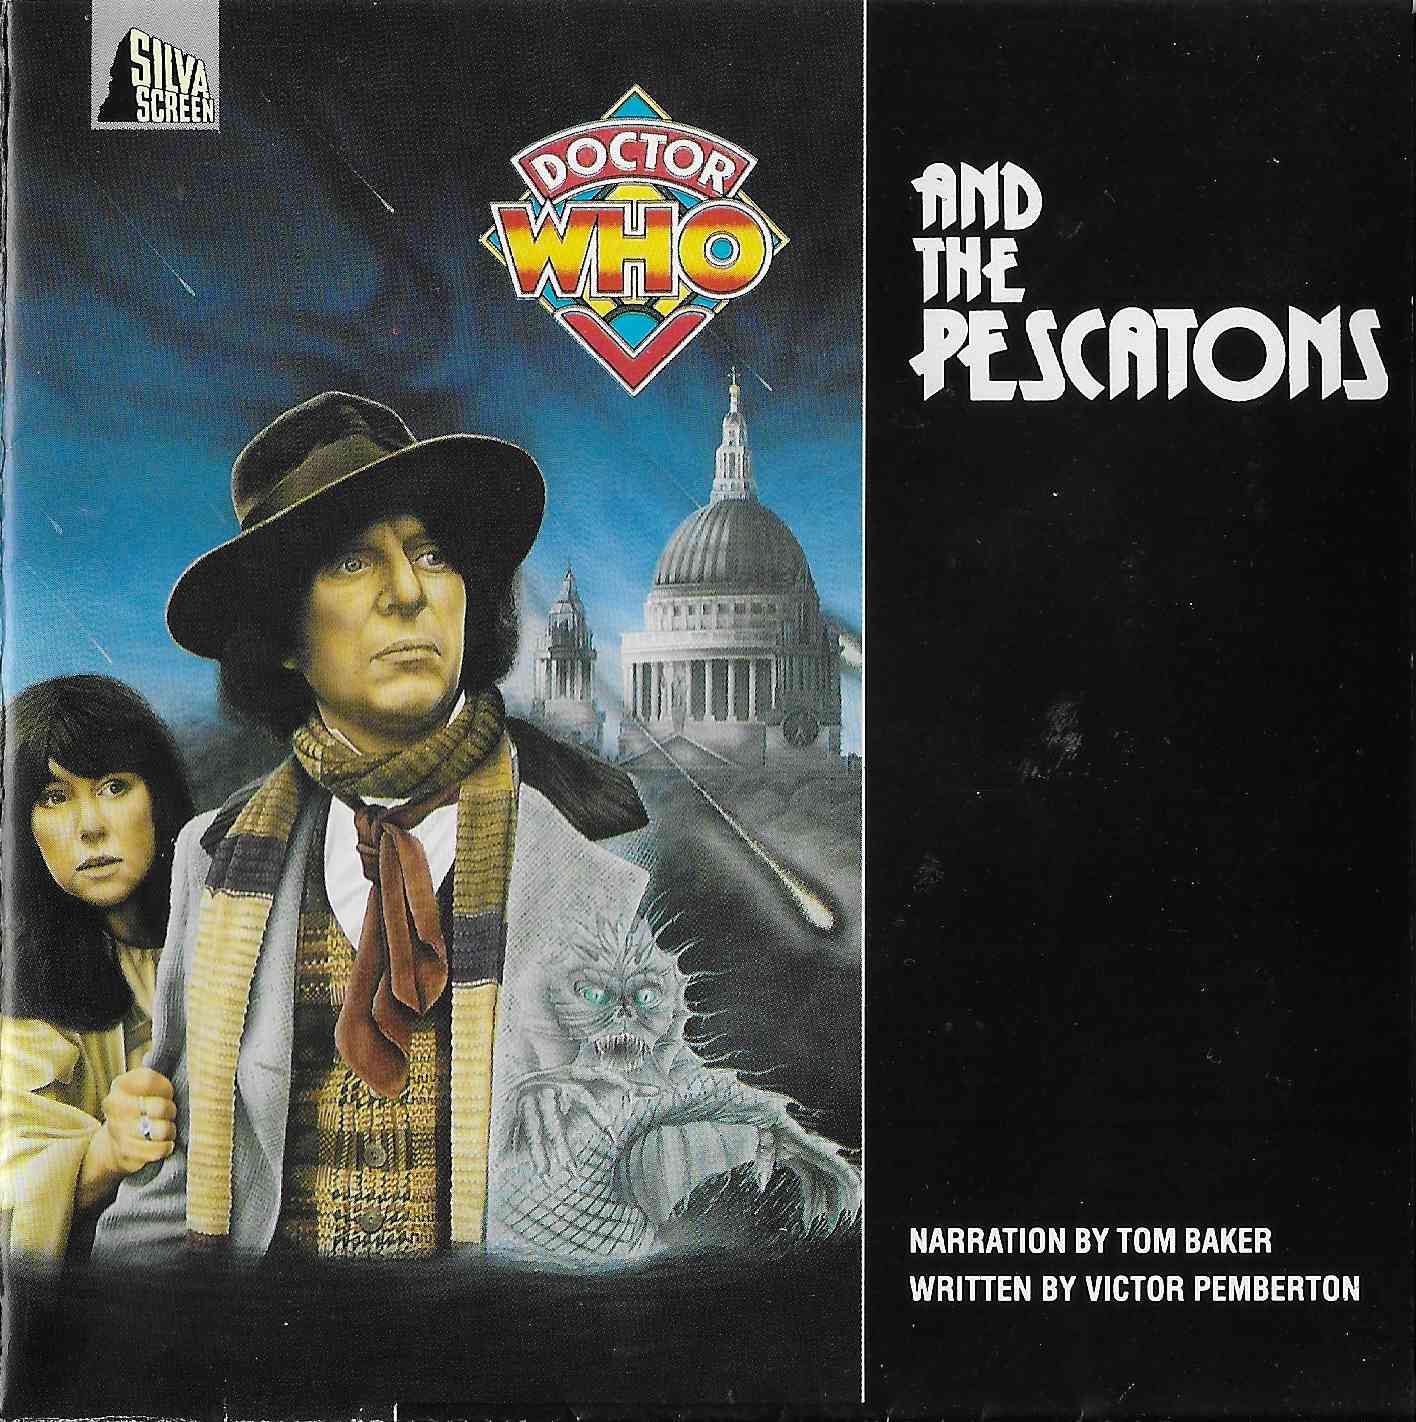 Picture of FILMCD 707 Doctor Who and the Pescatons by artist Victor Pemberton from the BBC cds - Records and Tapes library